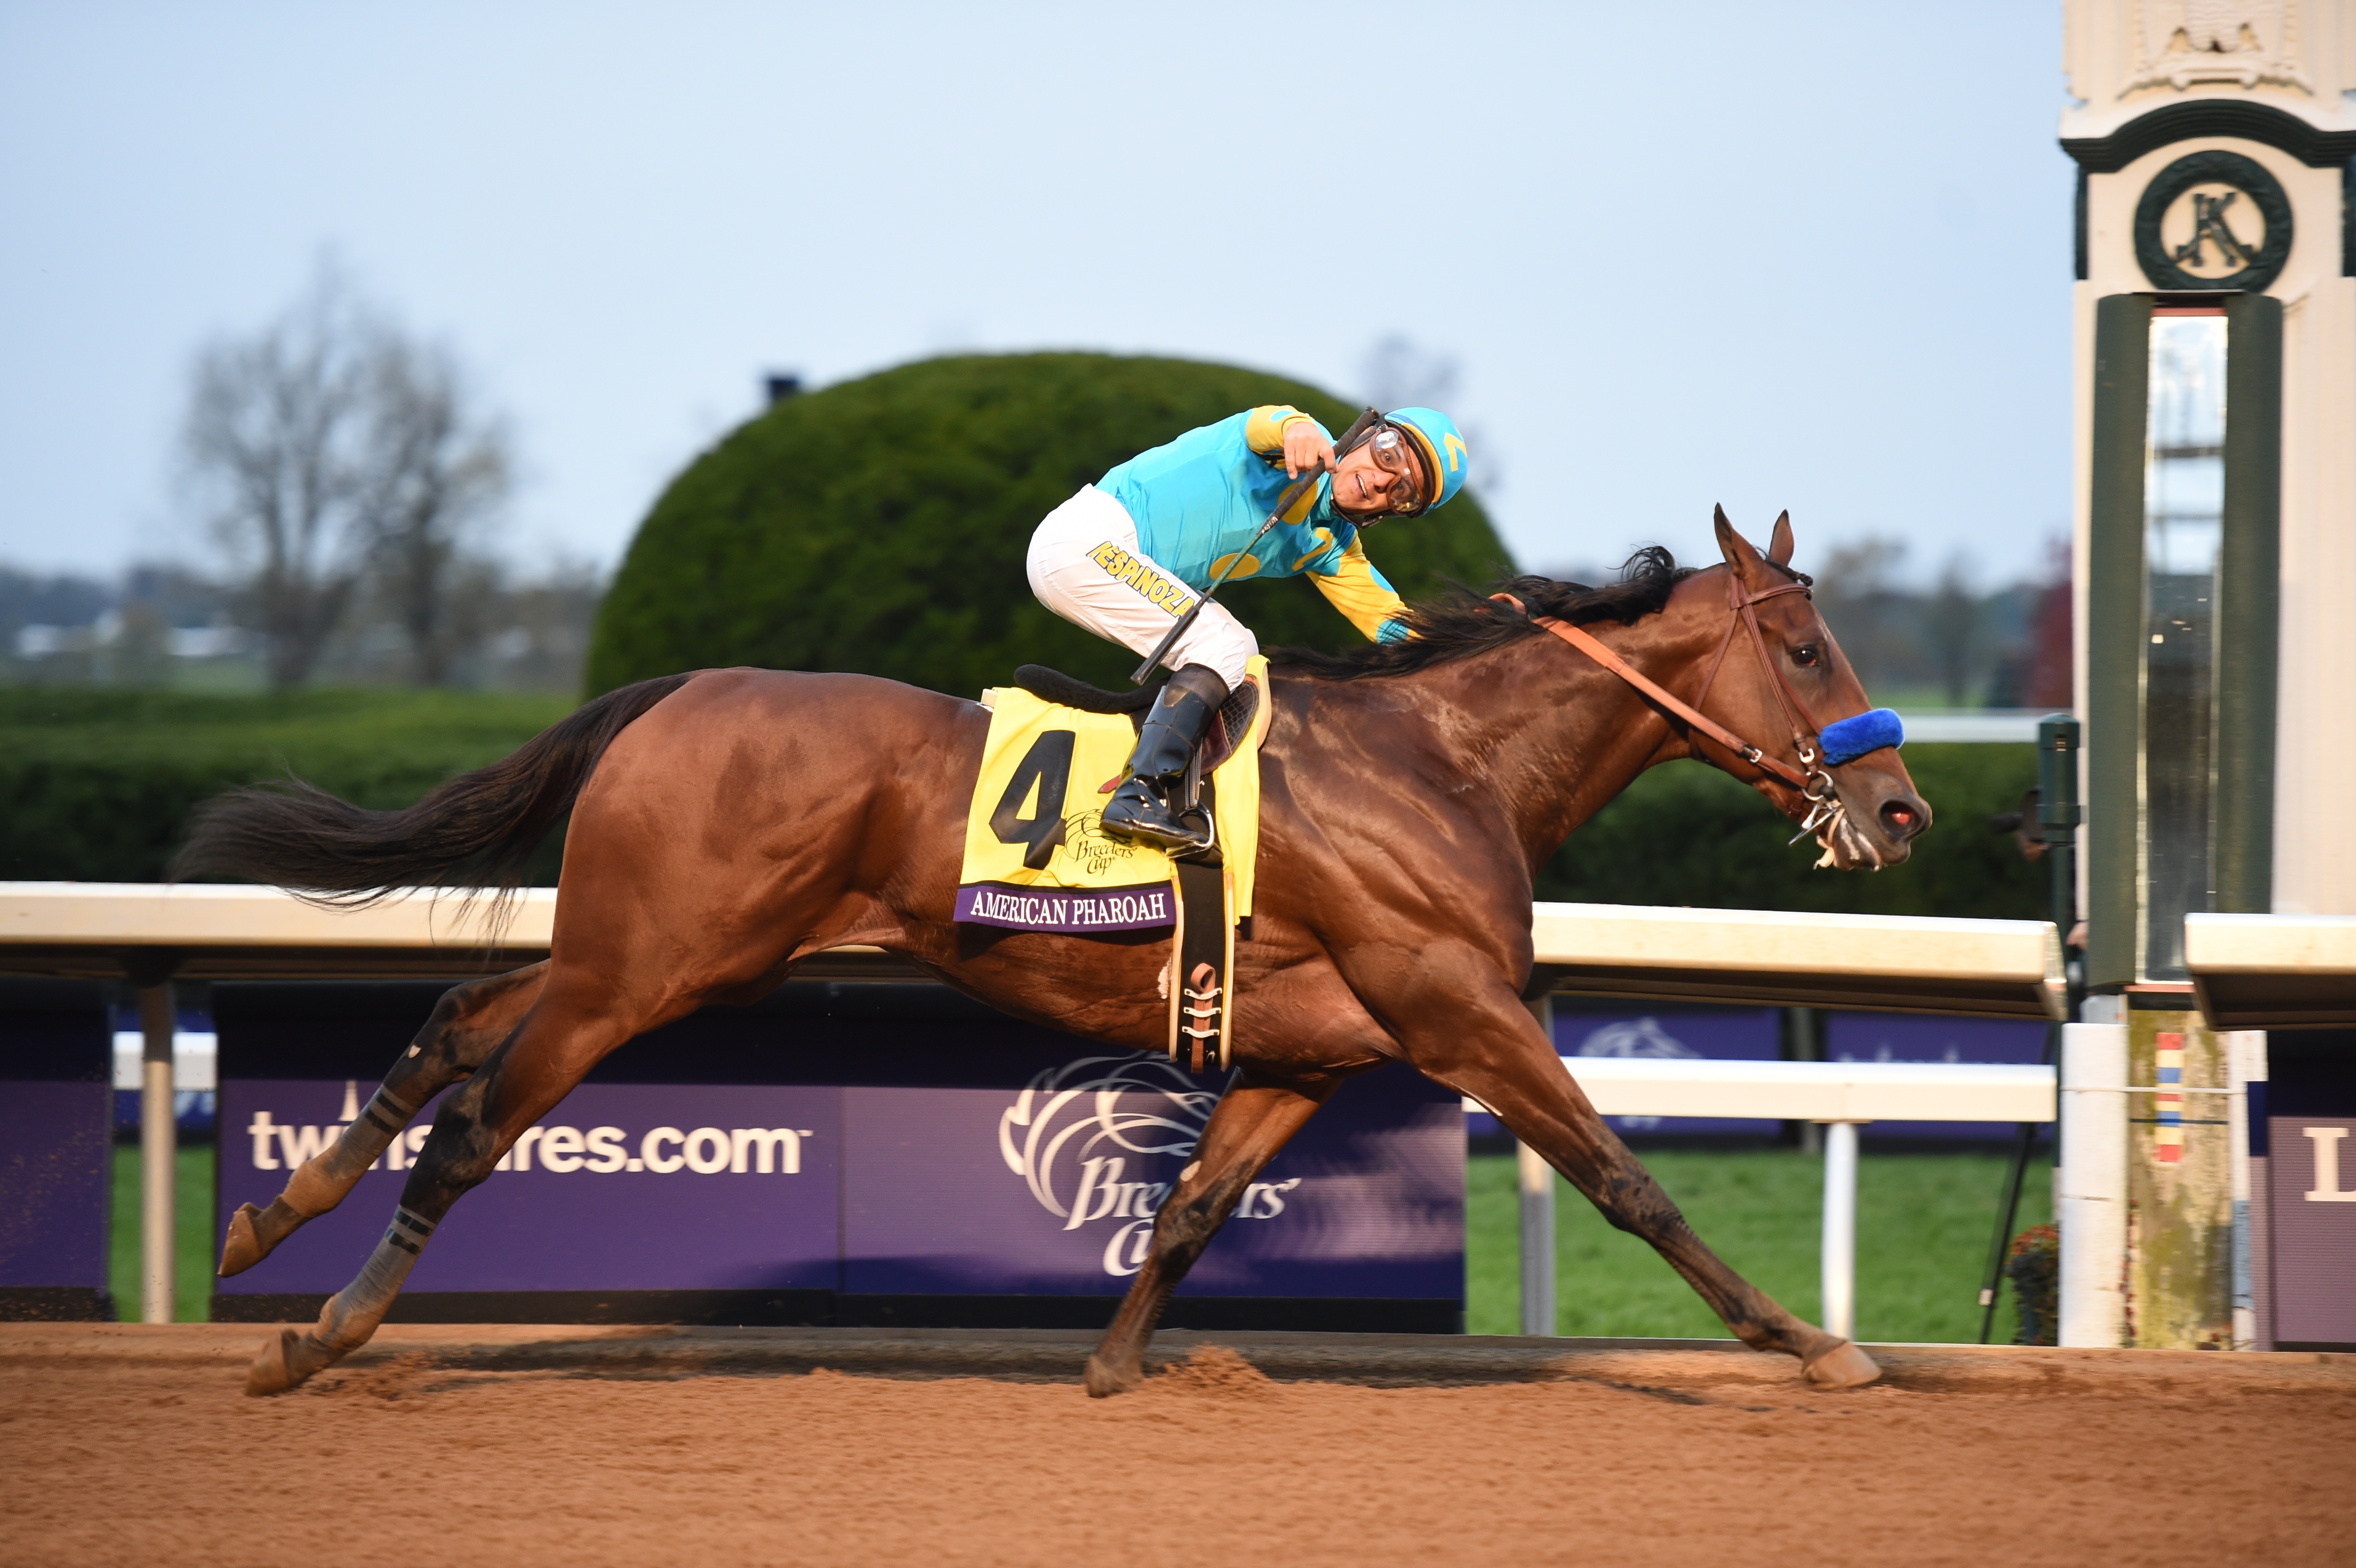 American Pharoah, Victor Espinoza up, winning the 2015 Breeders' Cup Classic at Keeneland in track-record time (Breeders' Cup/Eclipse Sportswire)